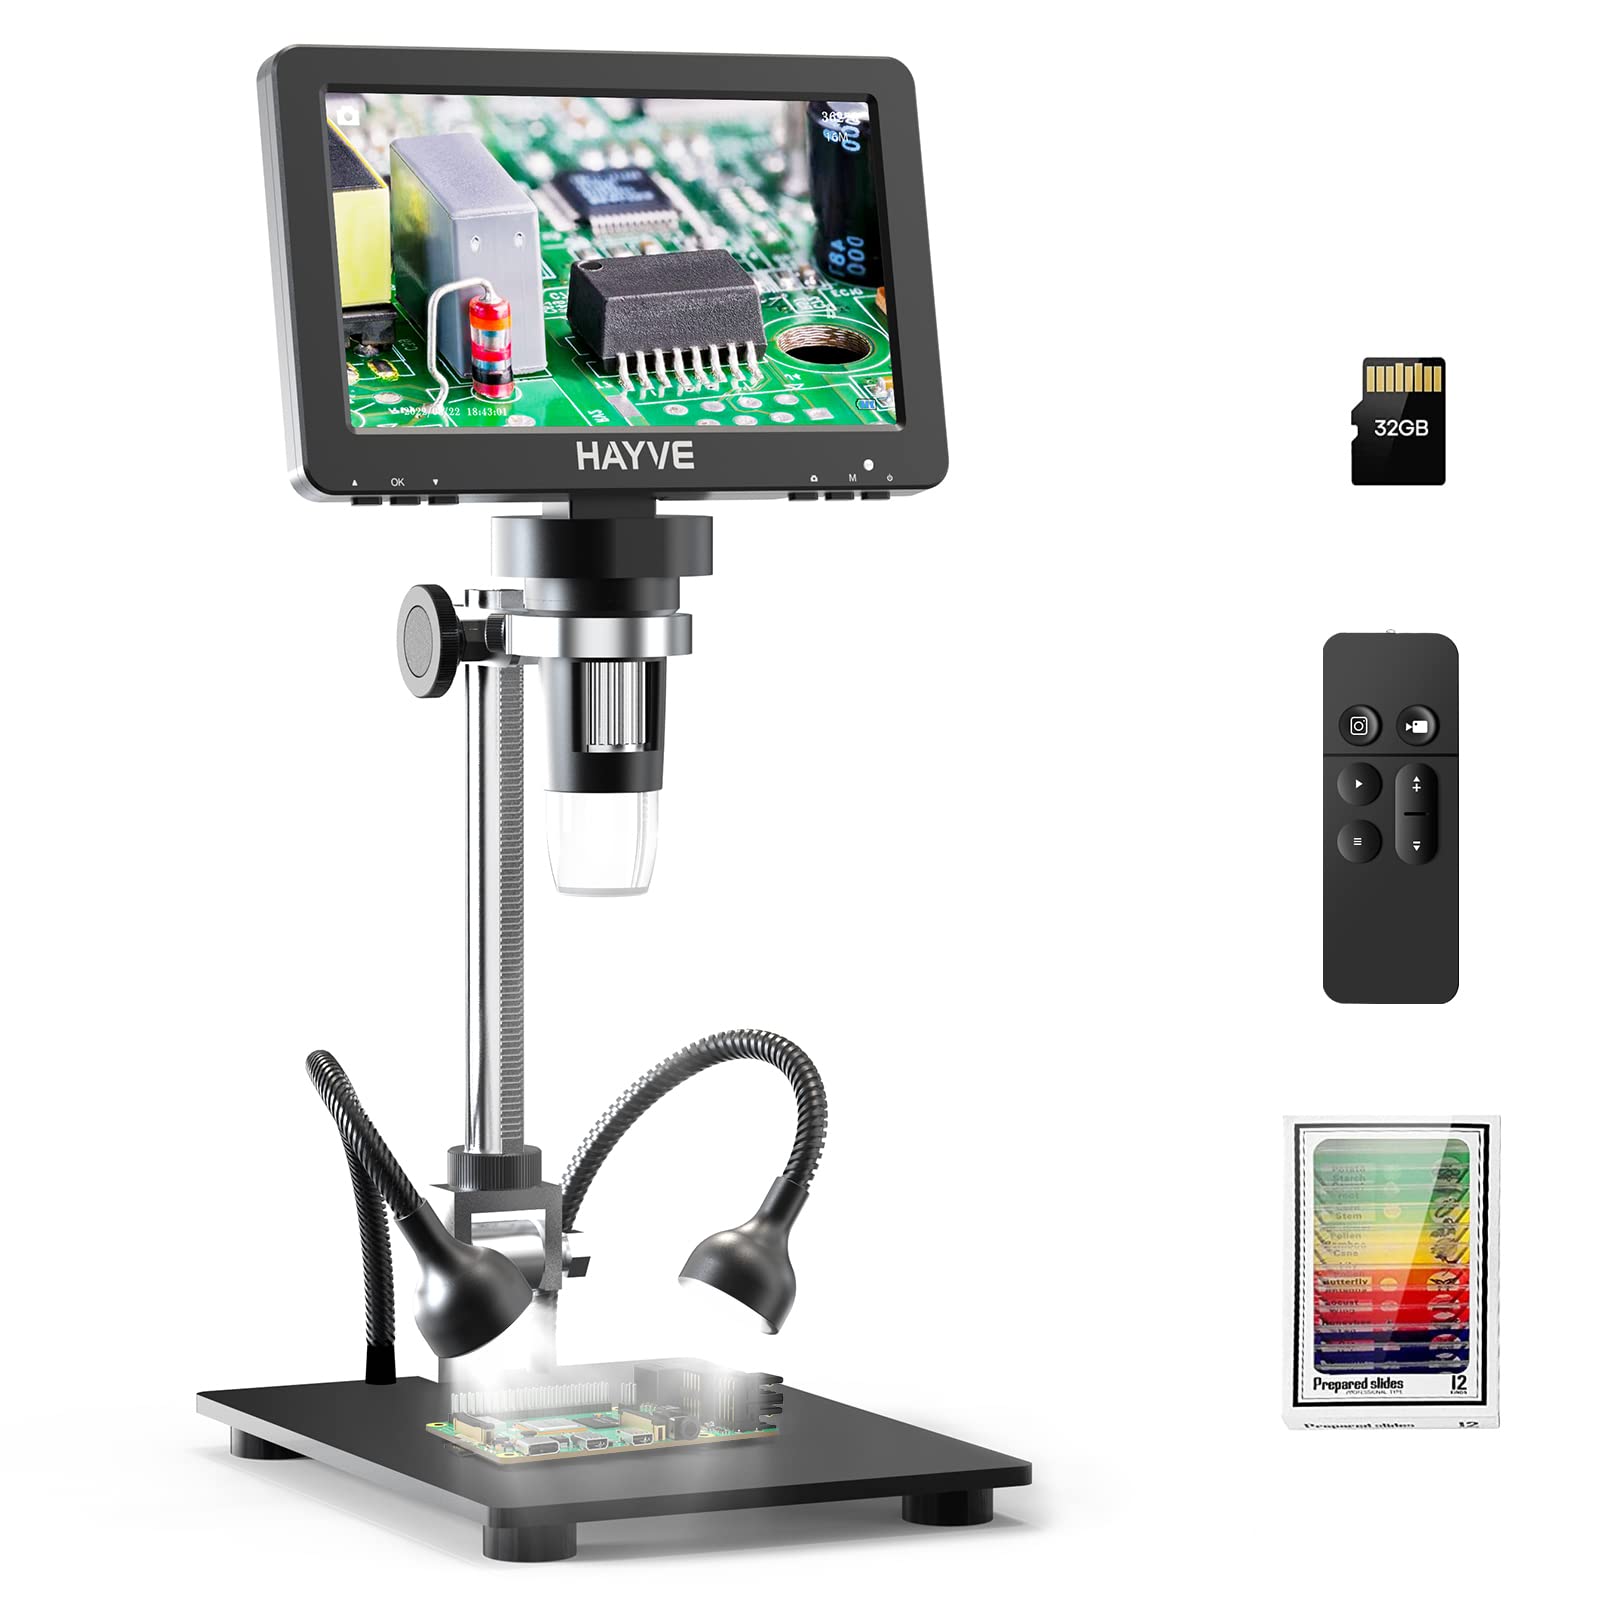 Hayve 7'' HDMI Digital Microscope,1200X Coin Microscope with IPS Screen,  16MP Soldering Microscope with Lights, 8.5'' Long Stand, View Entire Coin,  Compatible with PC/TV, 32GB Card 7''HDMI IPS Digital Microscope(DM9-H)